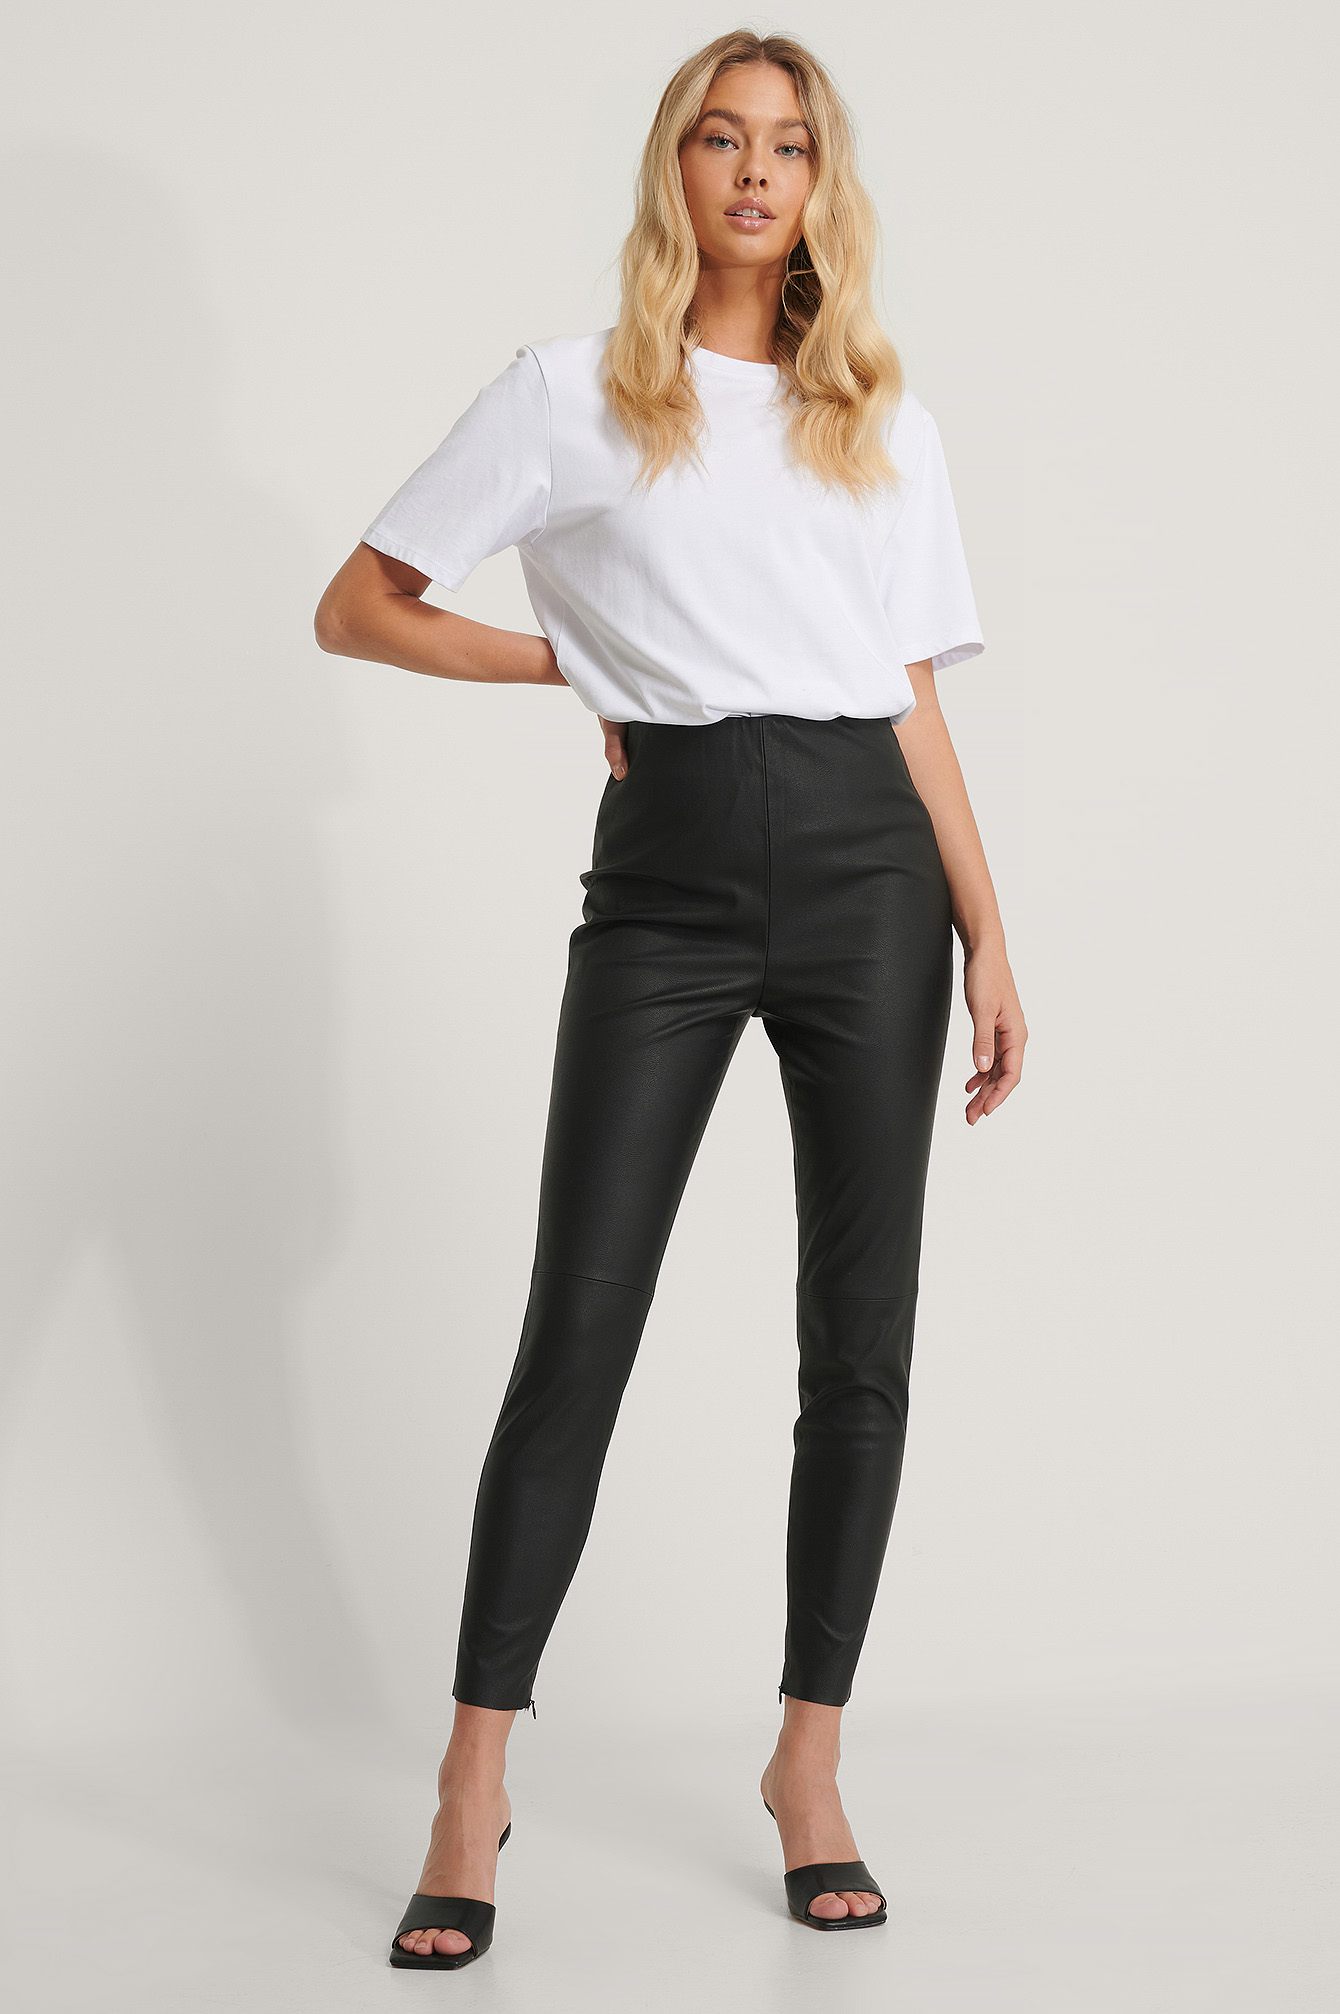 Buttoned Up Black Button Front PU Leggings